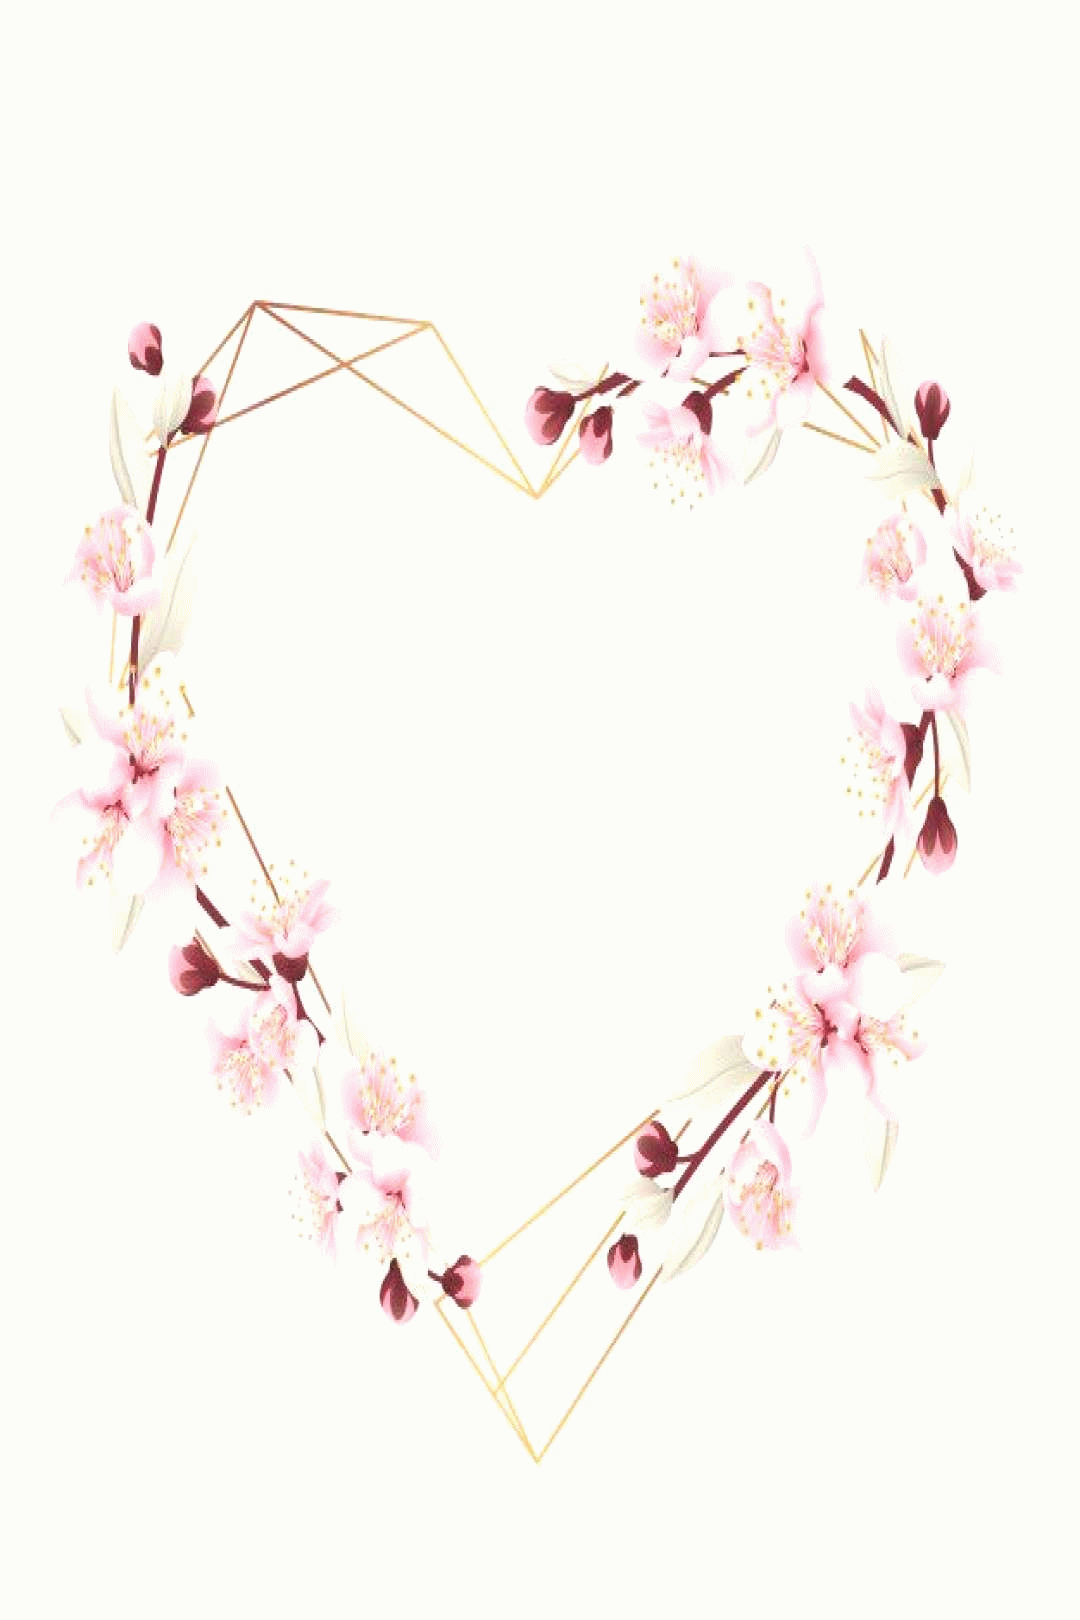 love floral frame background with cherry blossoms download